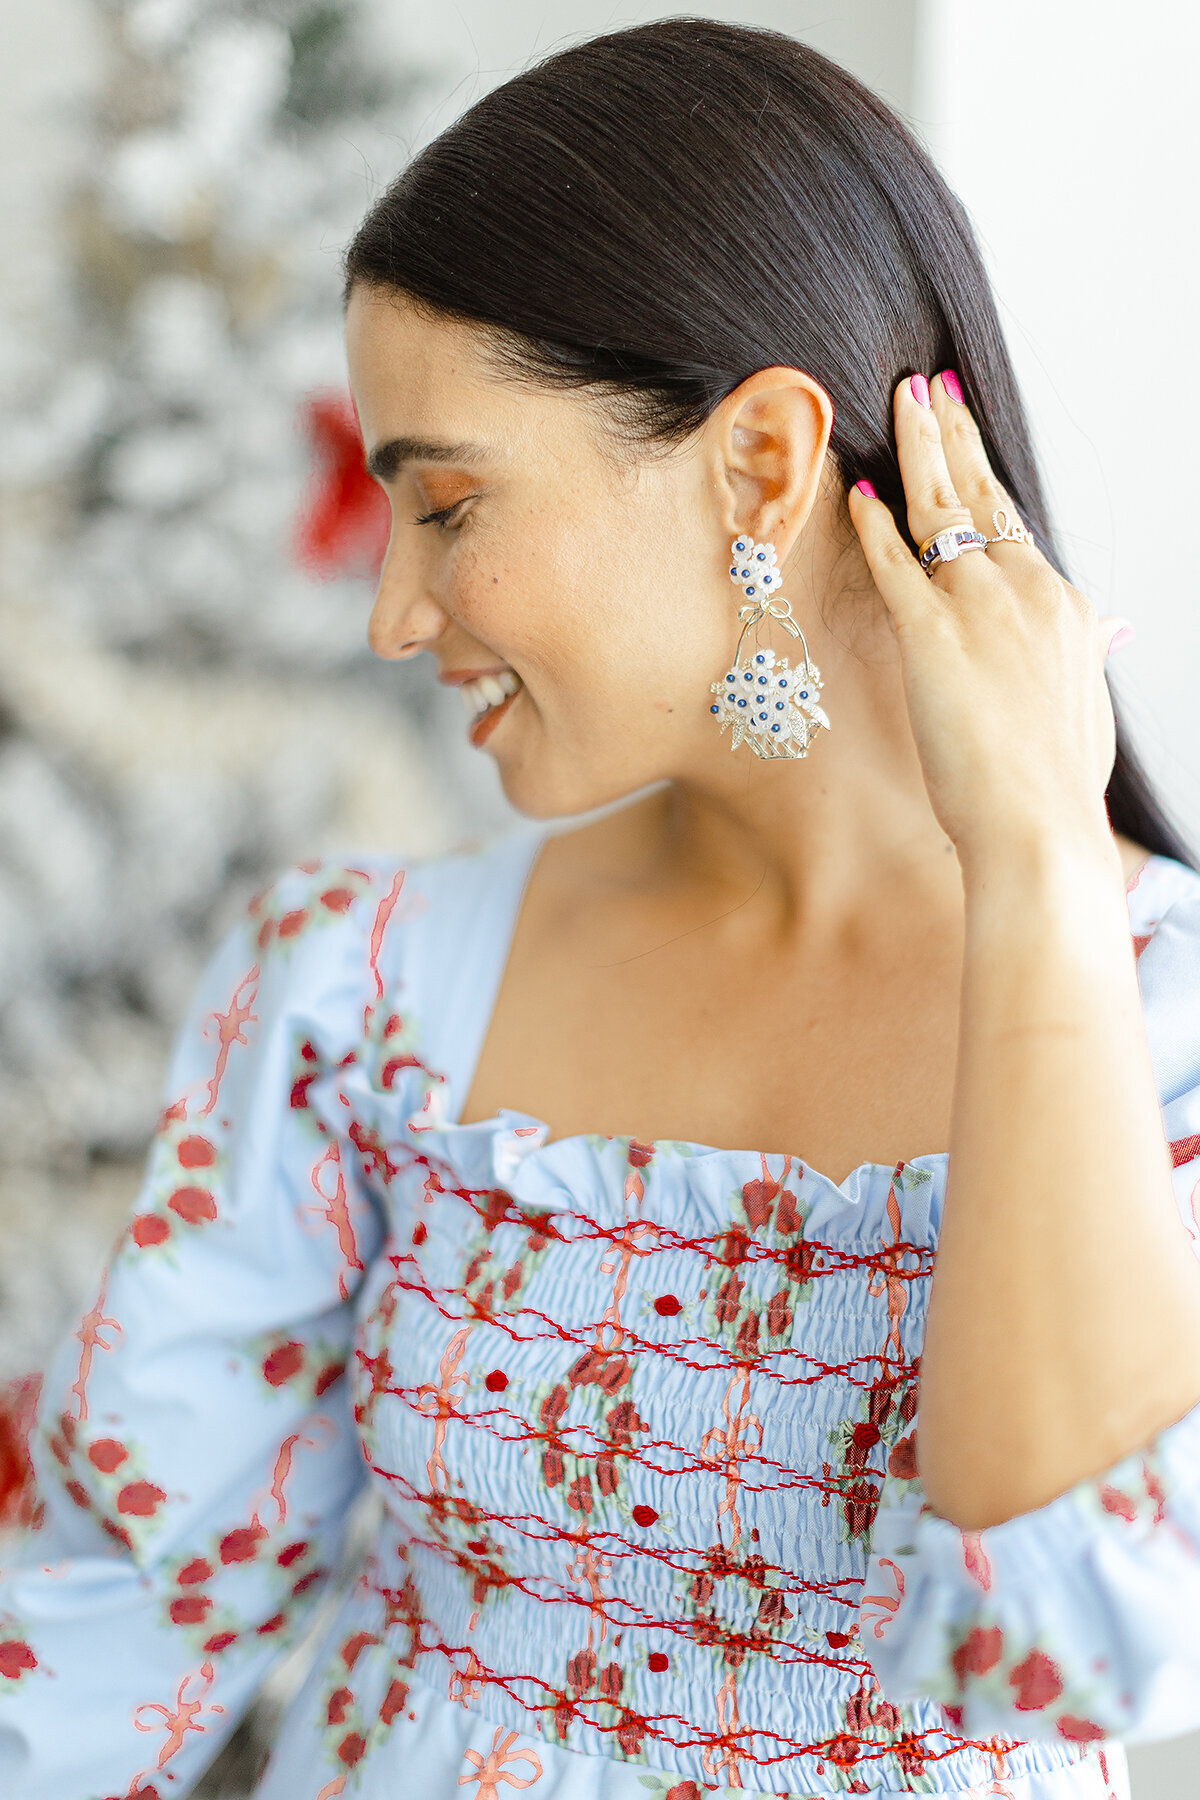 A model wearing a Dondolor christmas dress posing as she is holding her hair back to show off her holiday earrings.